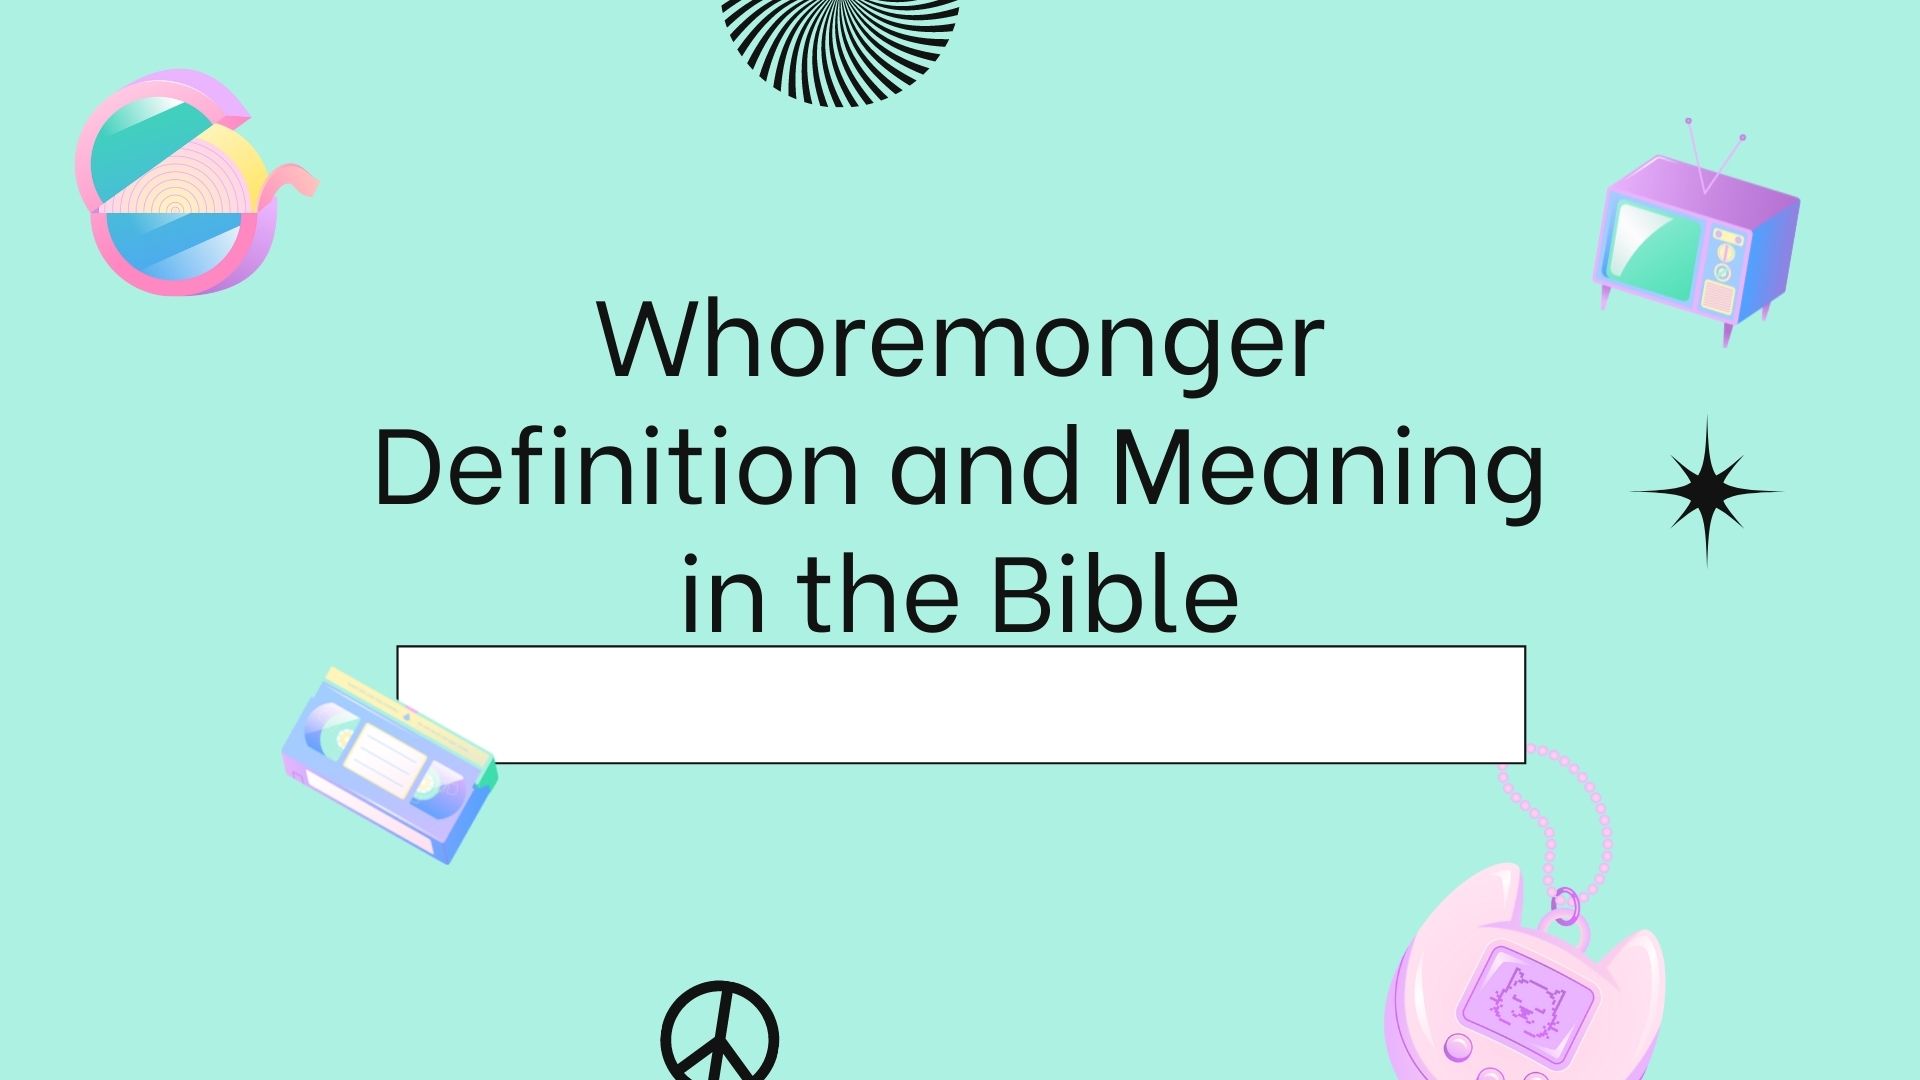 Whoremonger Definition and Meaning in the Bible